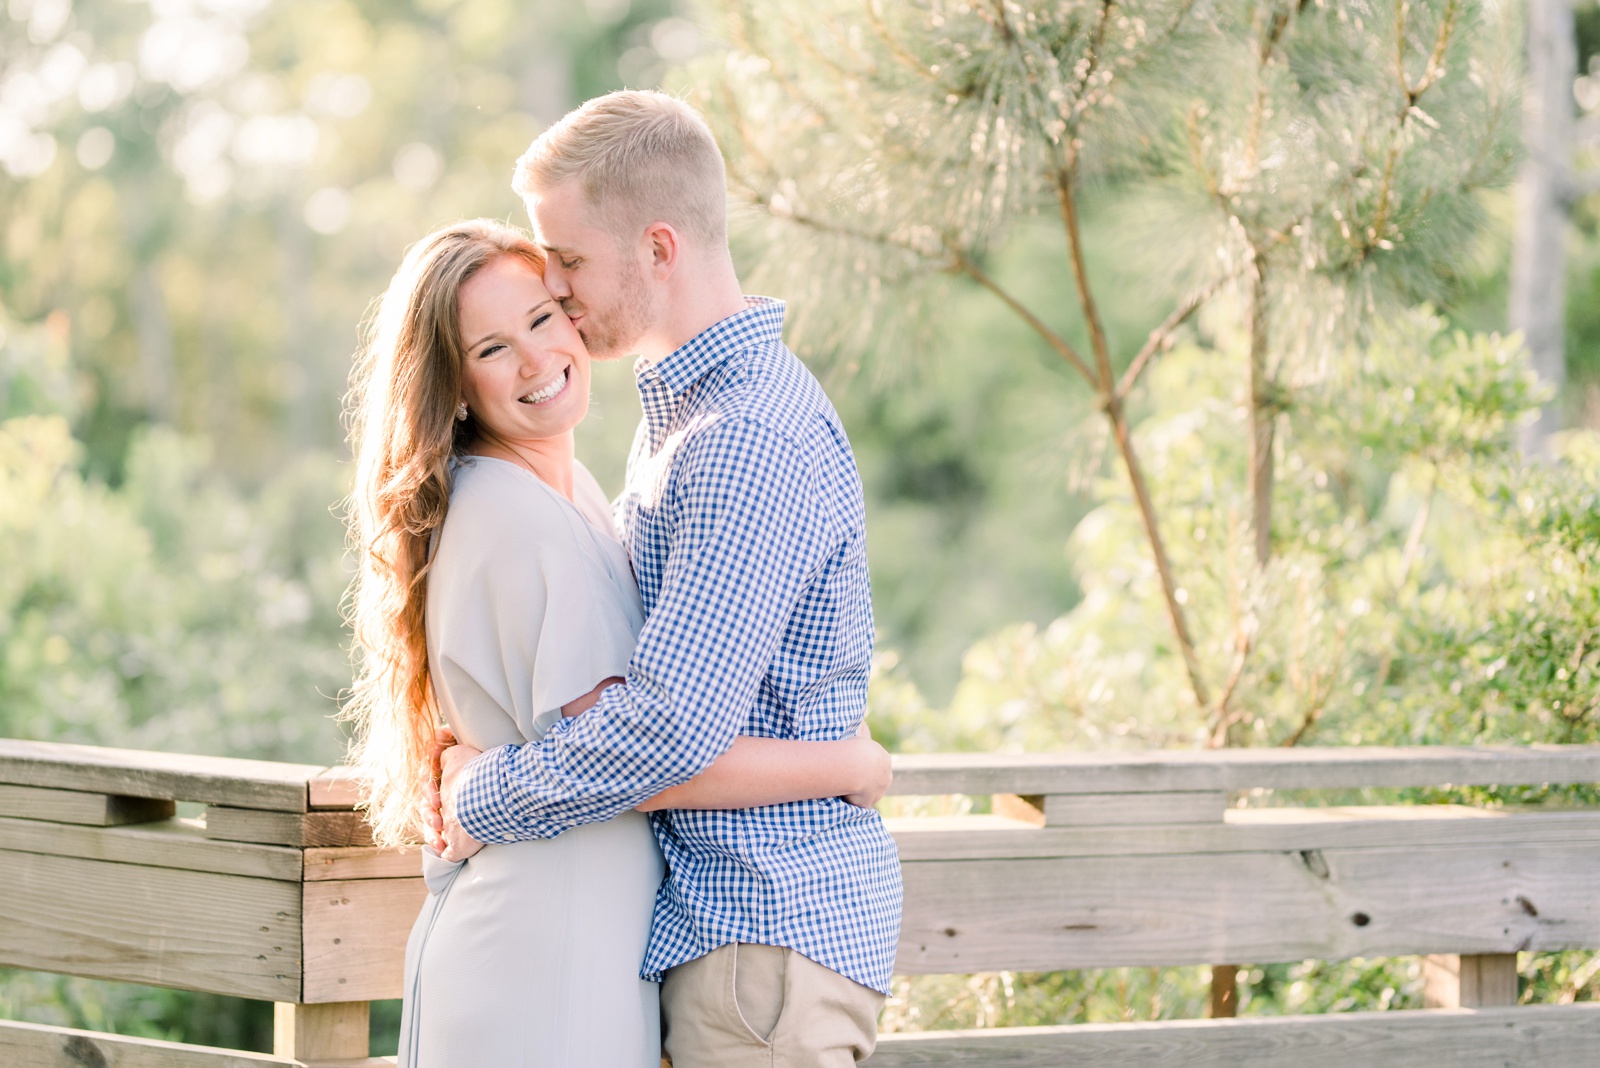 outer-banks-obx-kitty-hawk-engagement-photos_4612.jpg